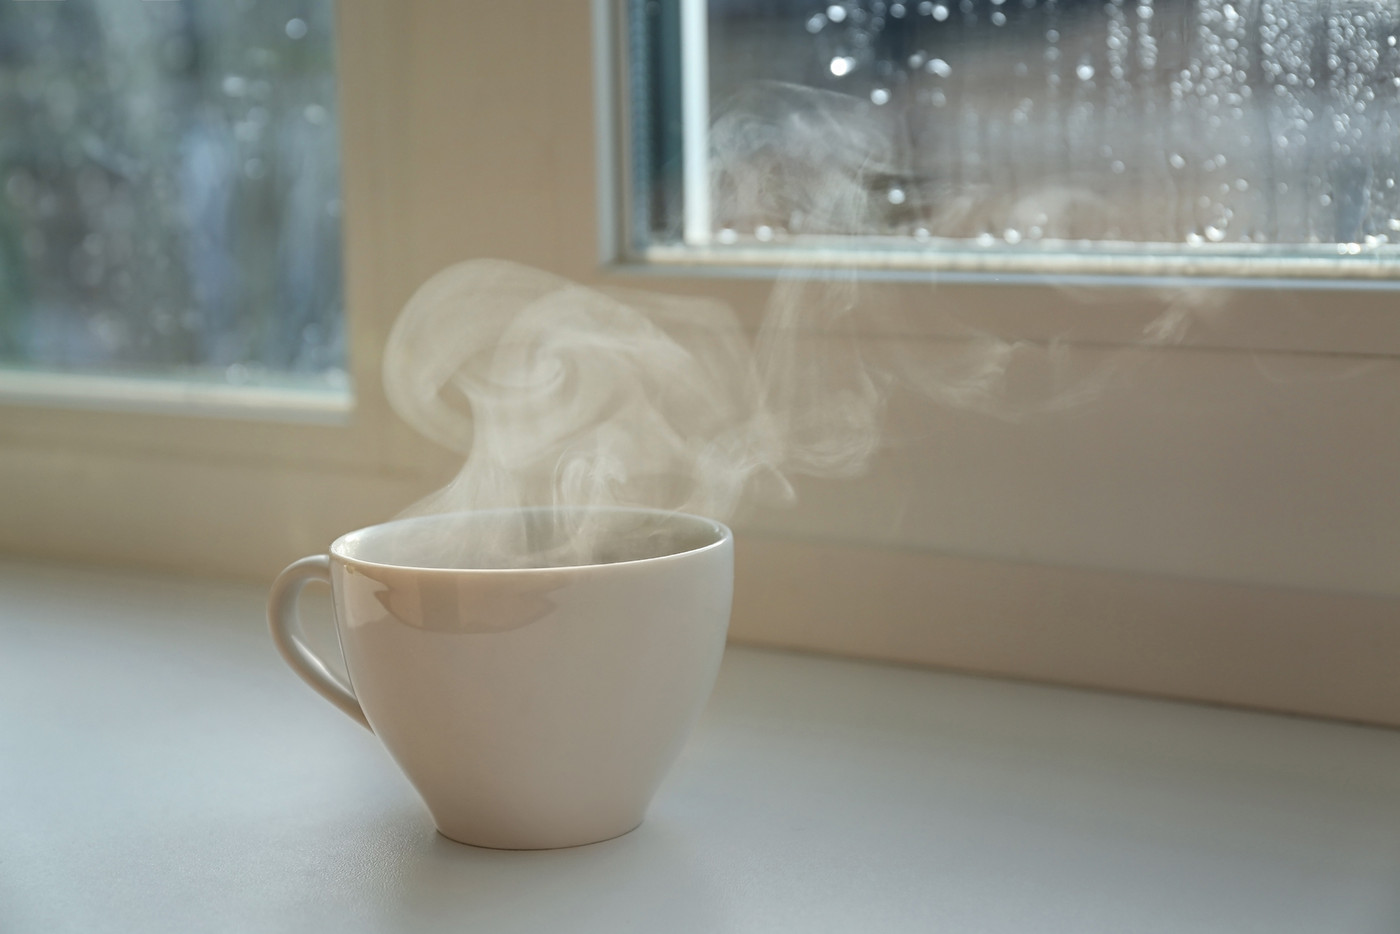 Cup of hot drink near window on rainy day.  Space for text